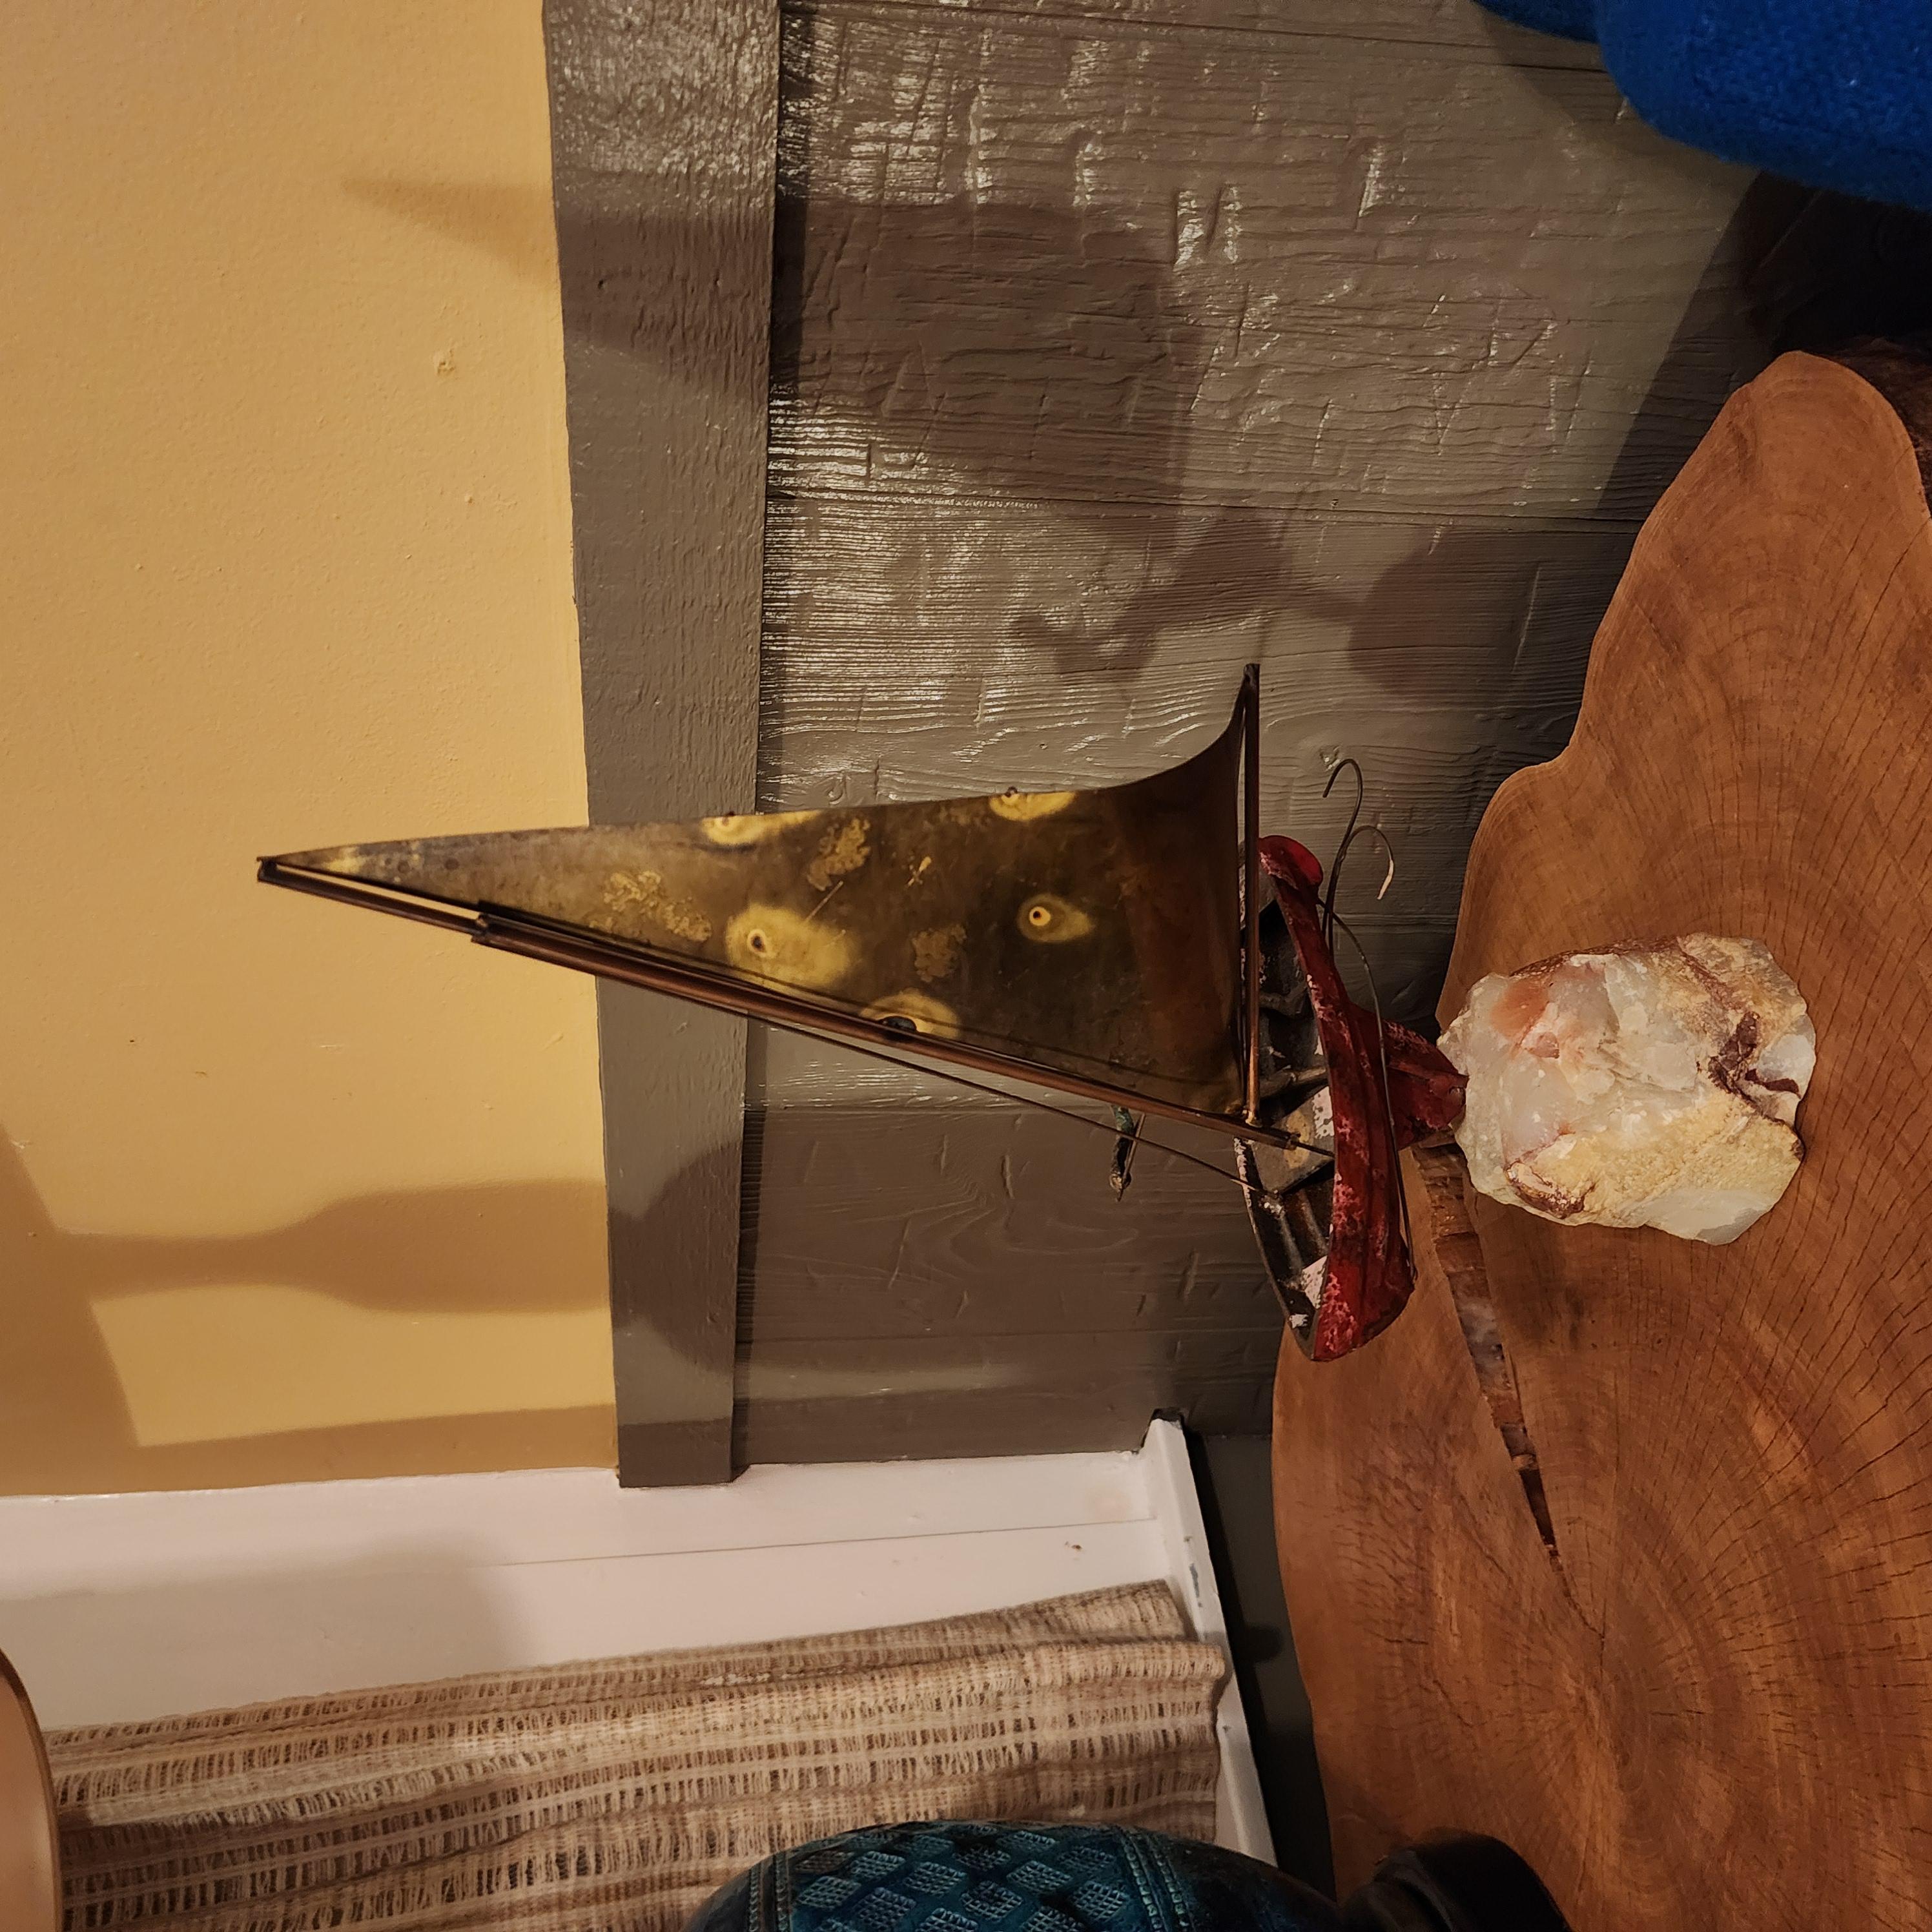 This is a great vintage brass sailboat art sculpture by Curtis Jere. Set on stone it has great texture and color. There is patina on the brass. This would be great in any setting.